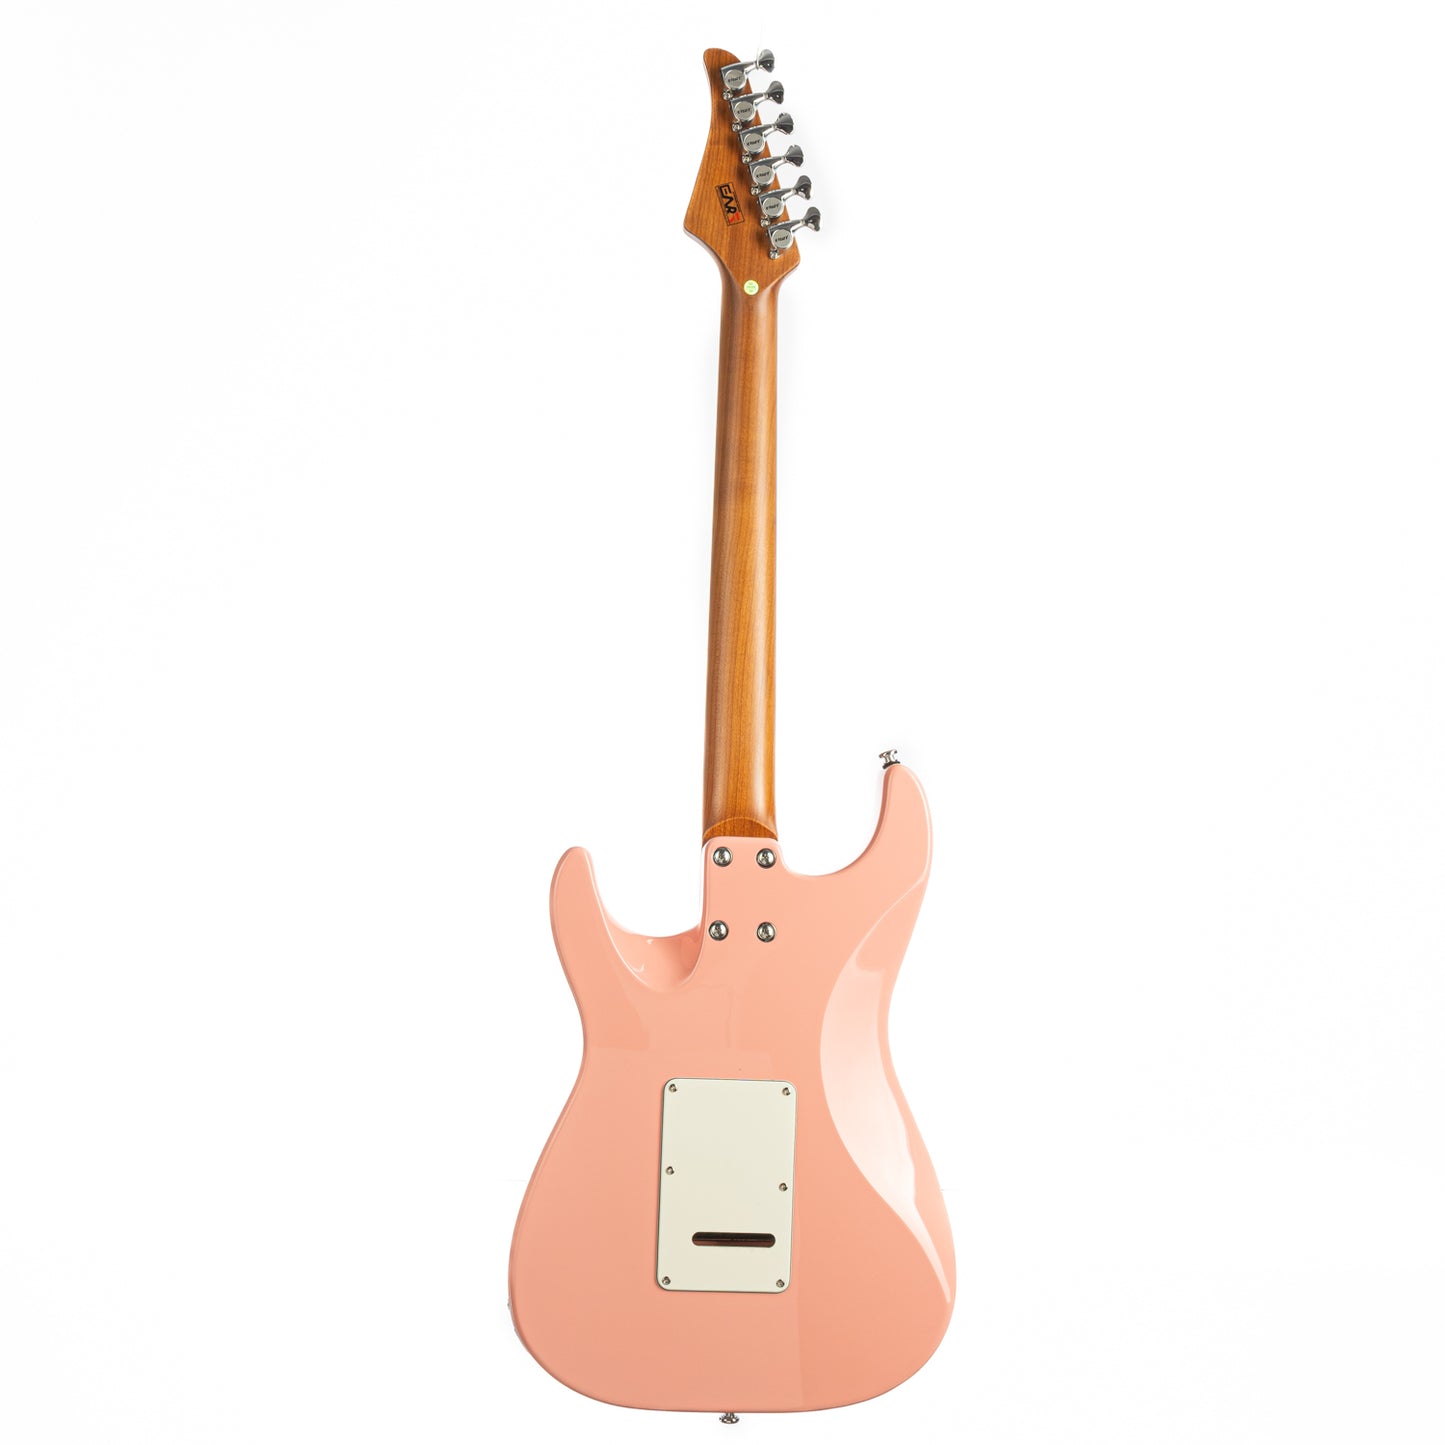 Eart Guitars, CP-1, HSS Pickups 2-Point Synchronized Tremolo Bridge Electric Guitar, Shell Pink